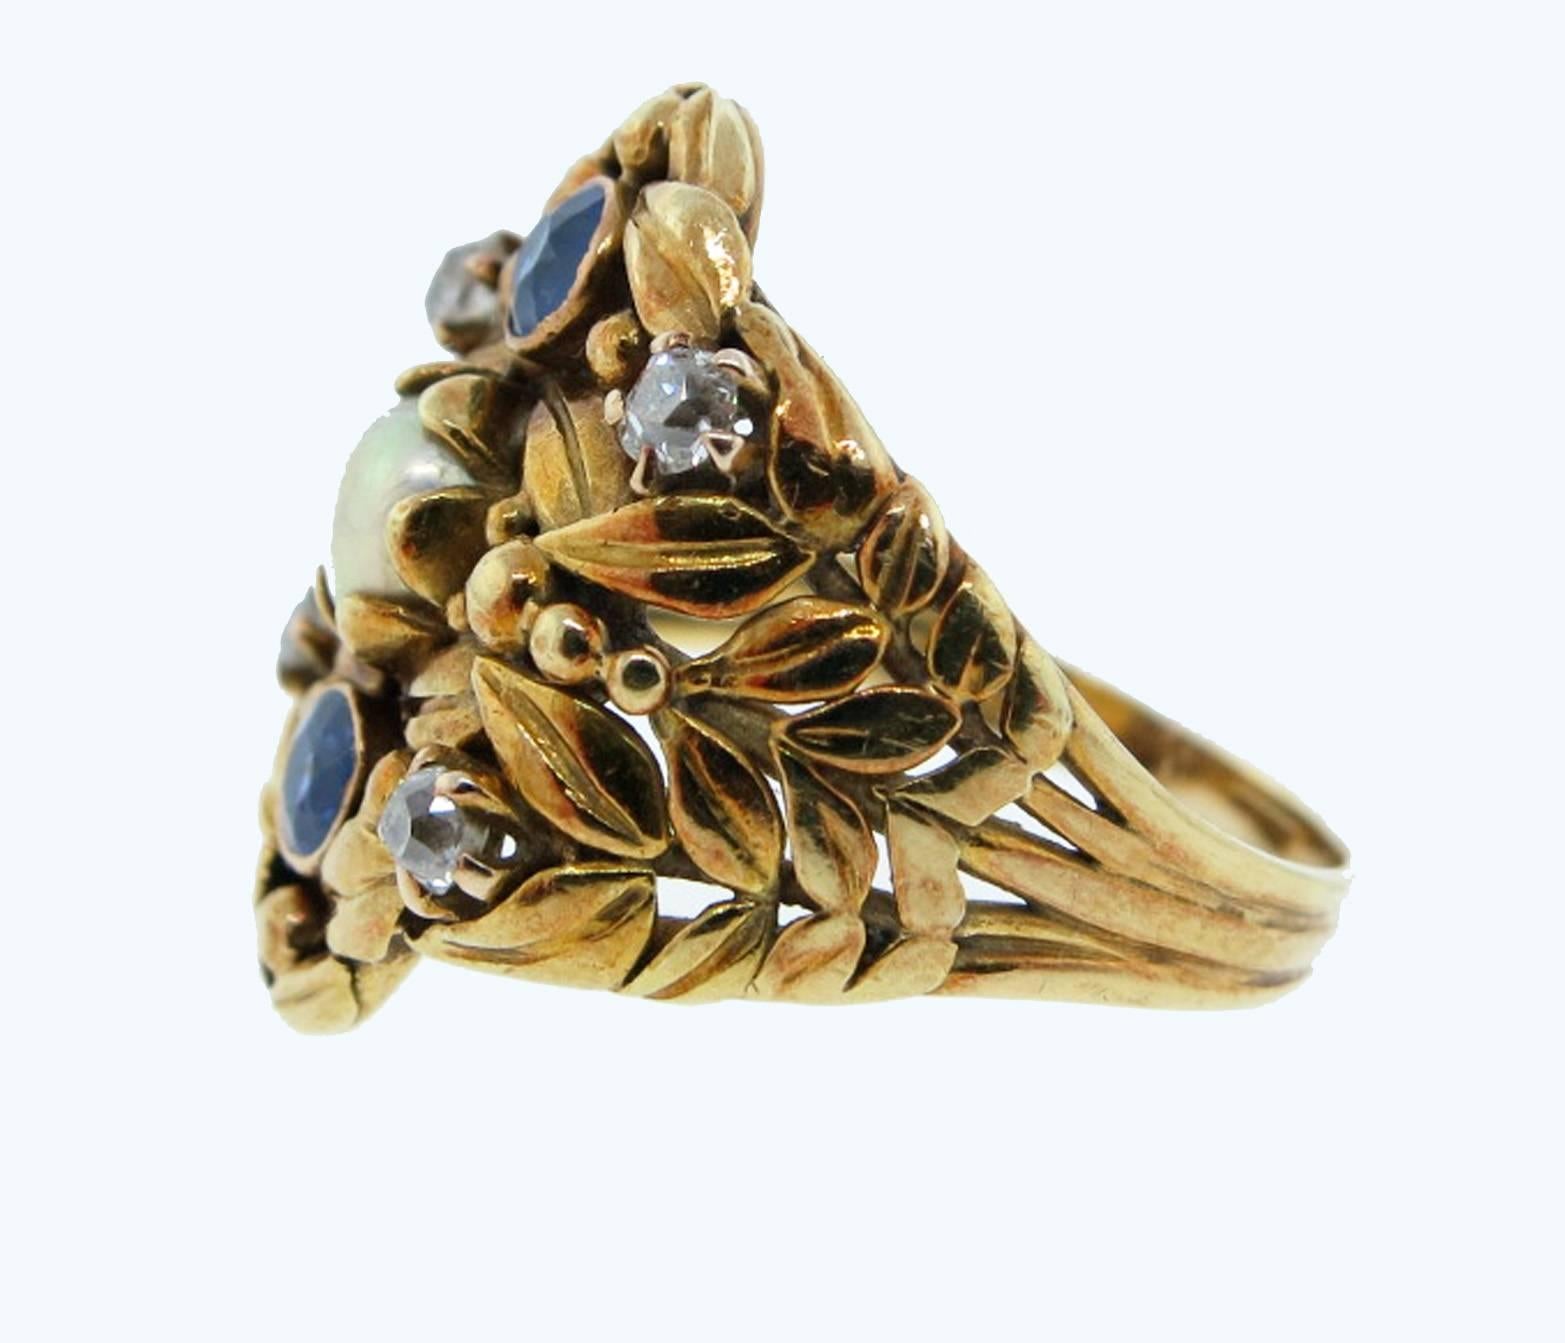 Lovely 14kt. yellow gold Art Nouveau ring circa 1910. The leaf design motif is set with a center natural pearl measuring approx 4.0mm. two natural cornflower blue sapphires and four old European cut diamonds. Size 6 and can be sized. 